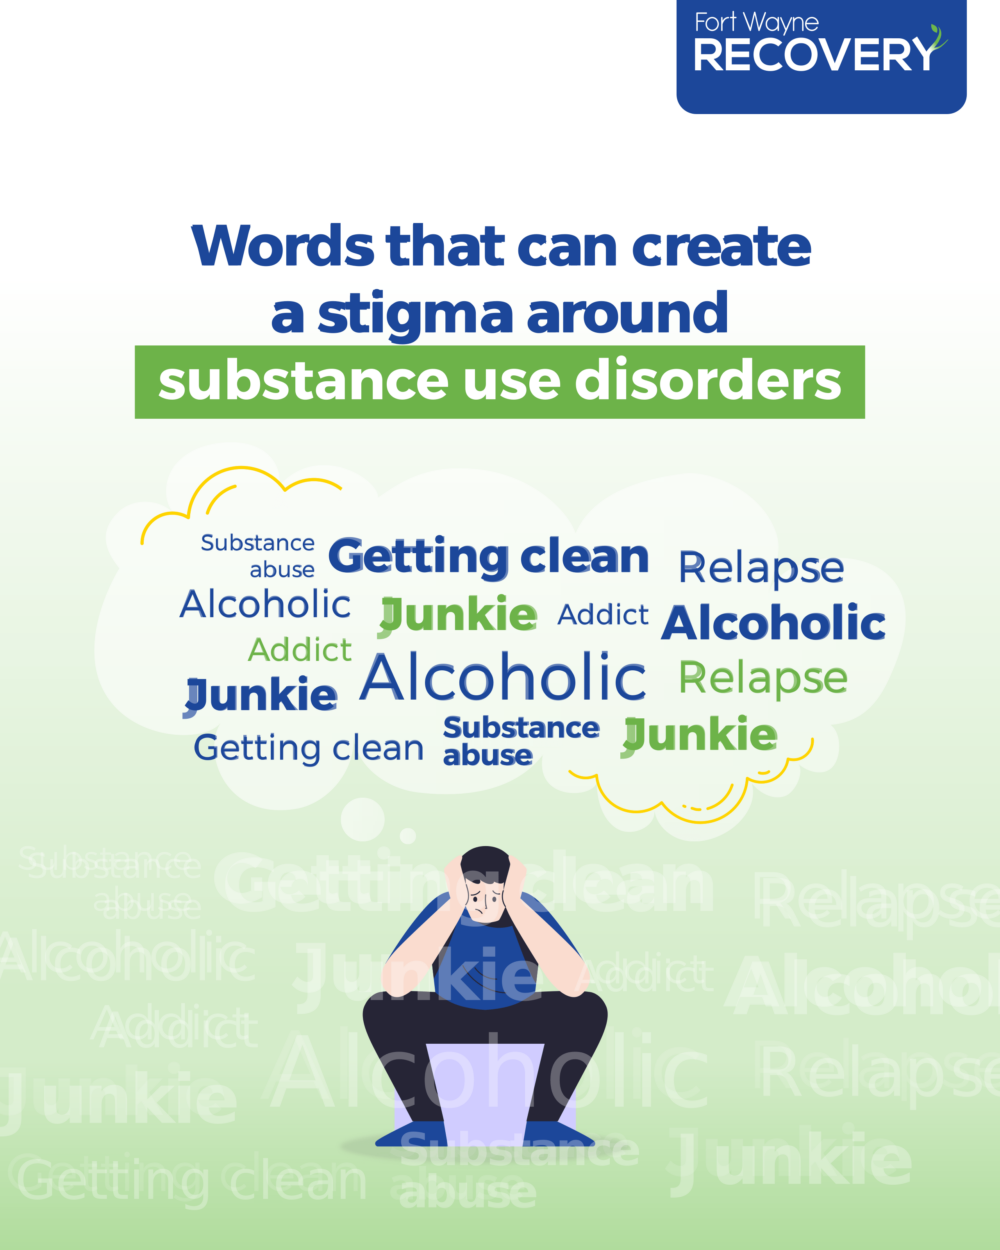 Words Matter Infographic Fort Wayne Recovery